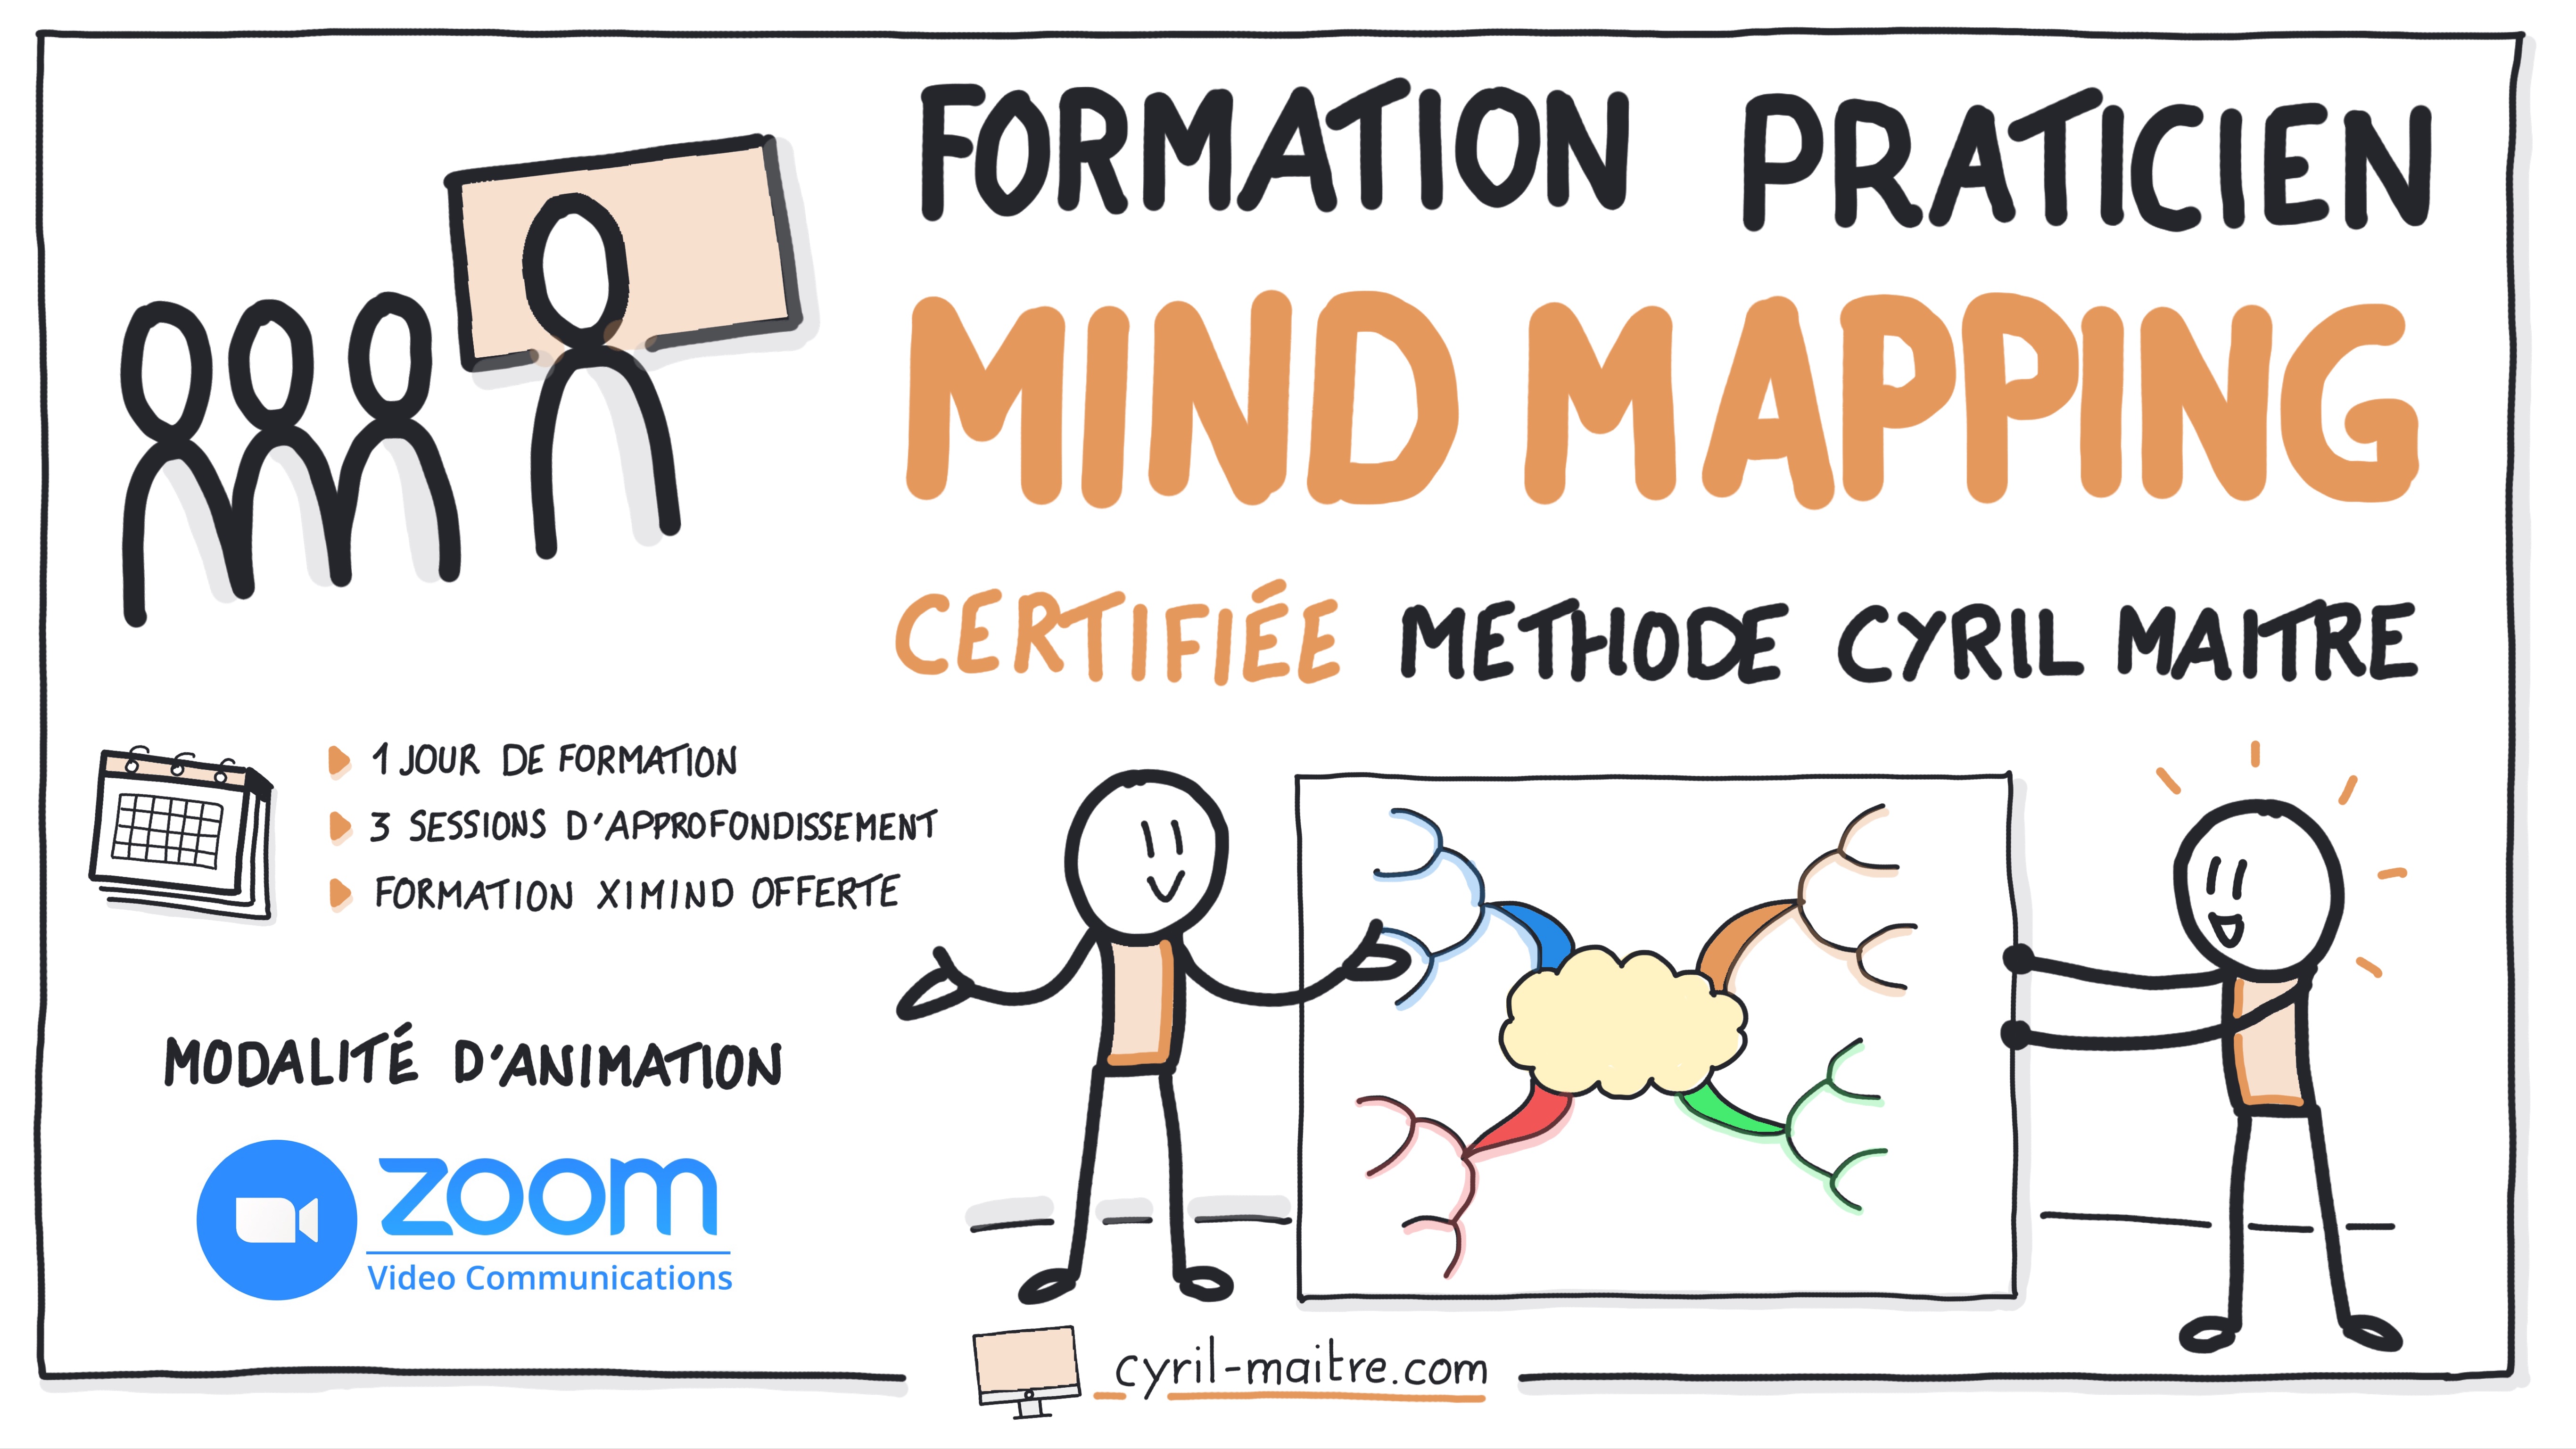 Les formations Zoom Praticien Mind Mapping